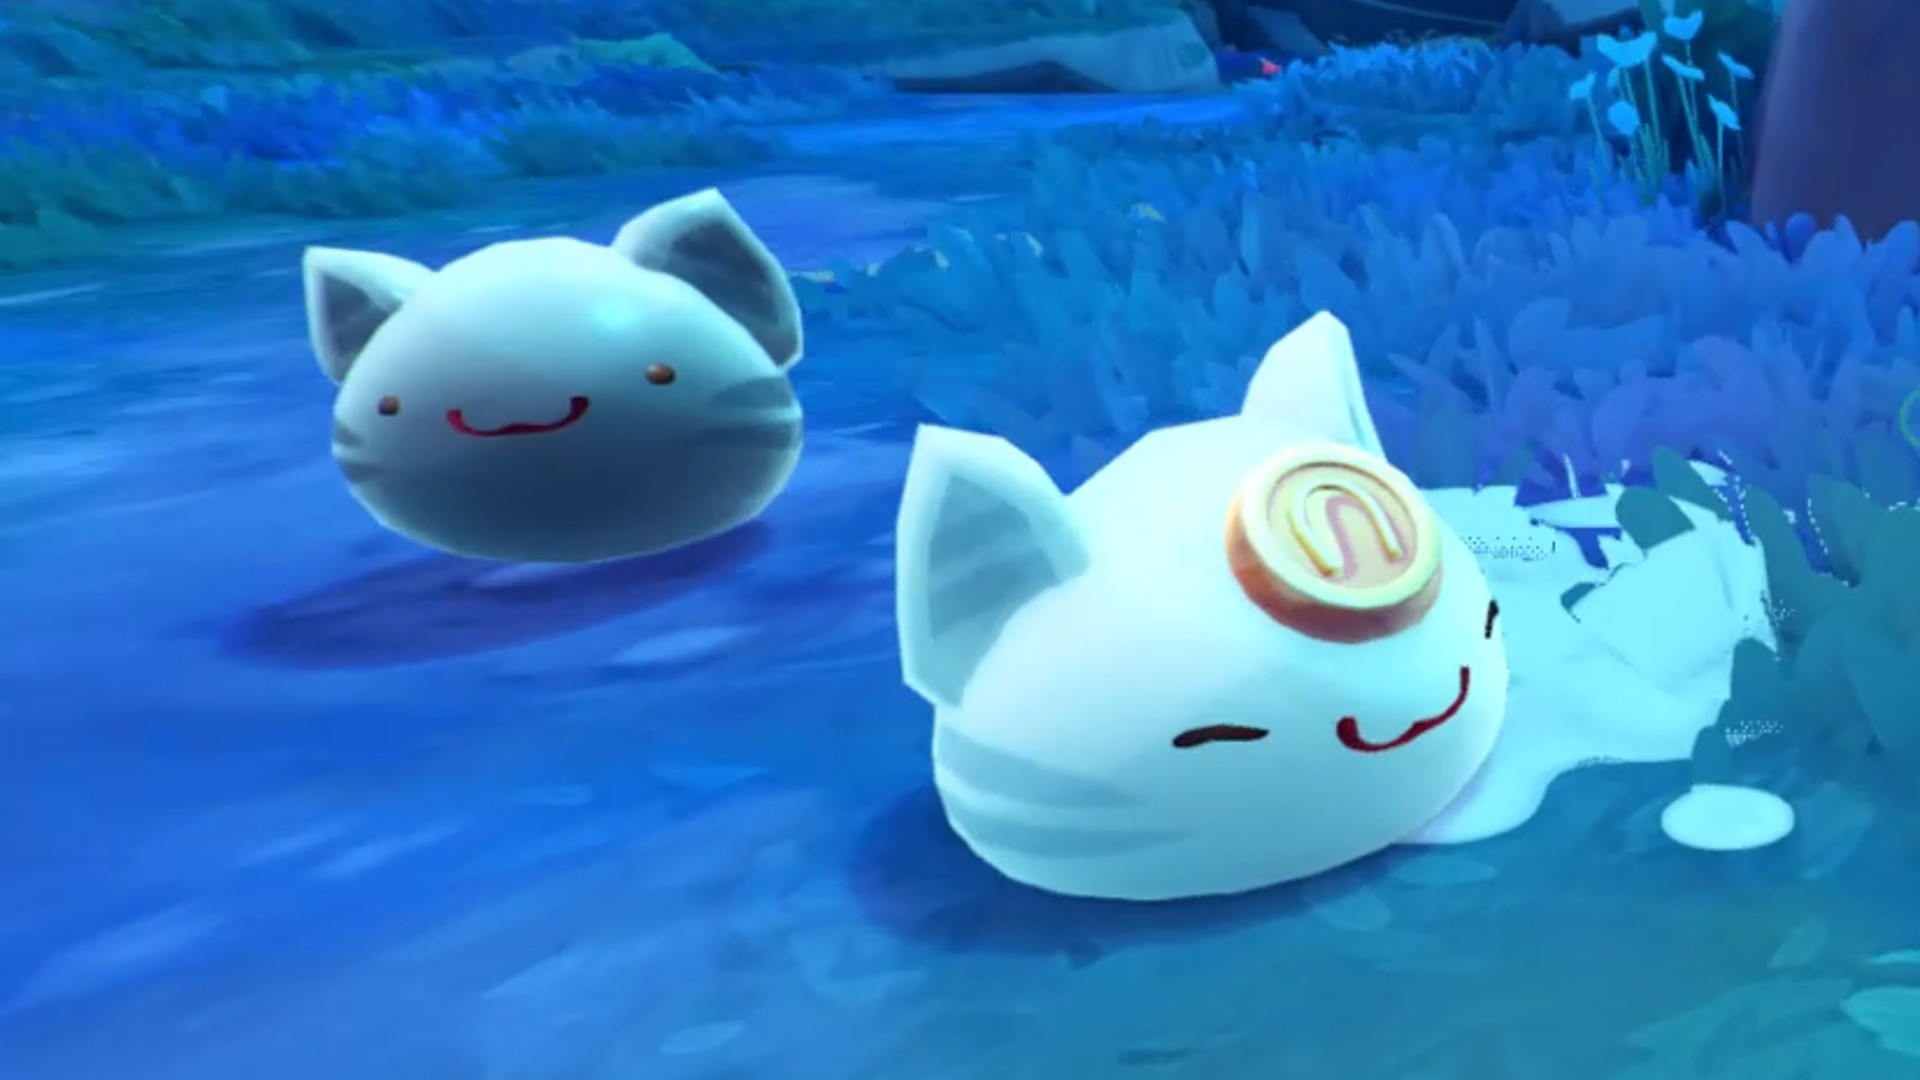 Which New Slime From Slime Rancher 2 Fits Your Vibe? 